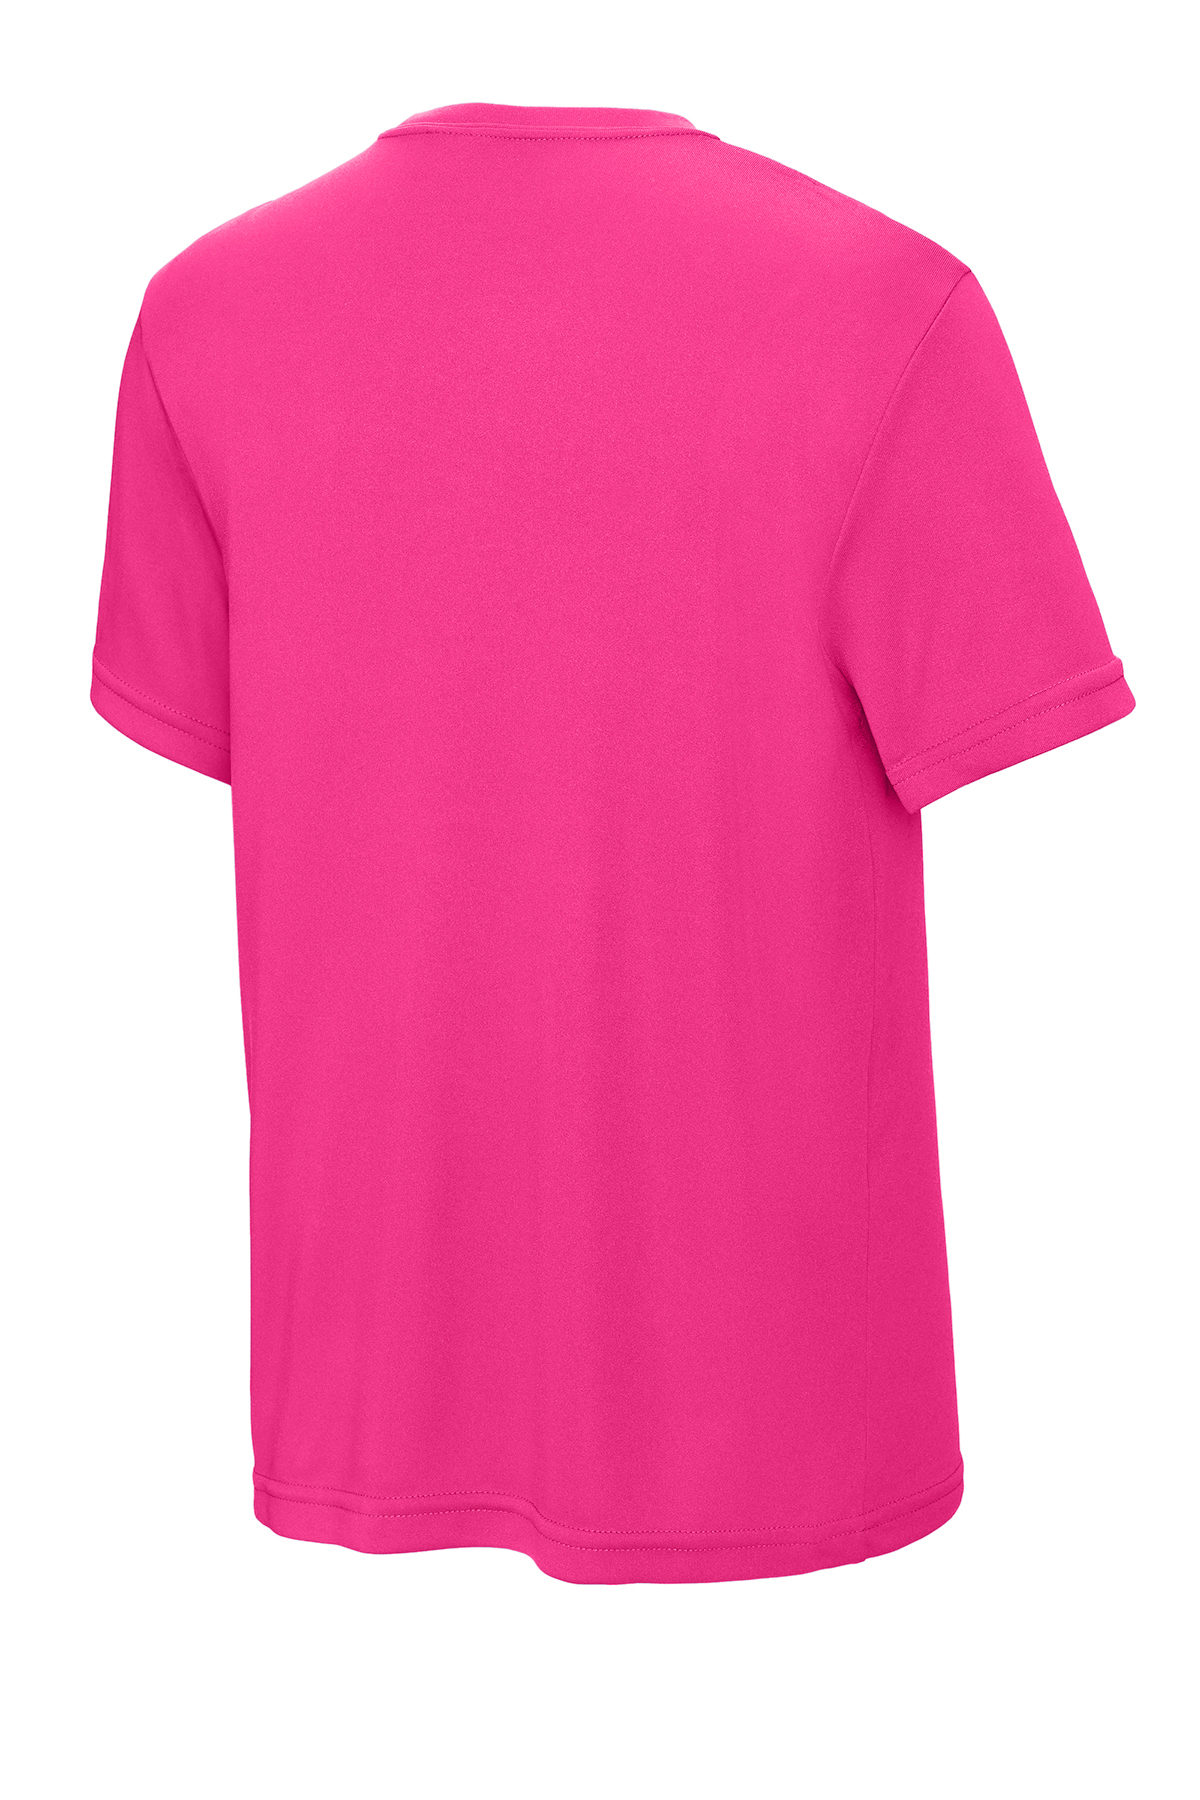 Sport-Tek Youth PosiCharge Competitor™ Tee | Product | SanMar